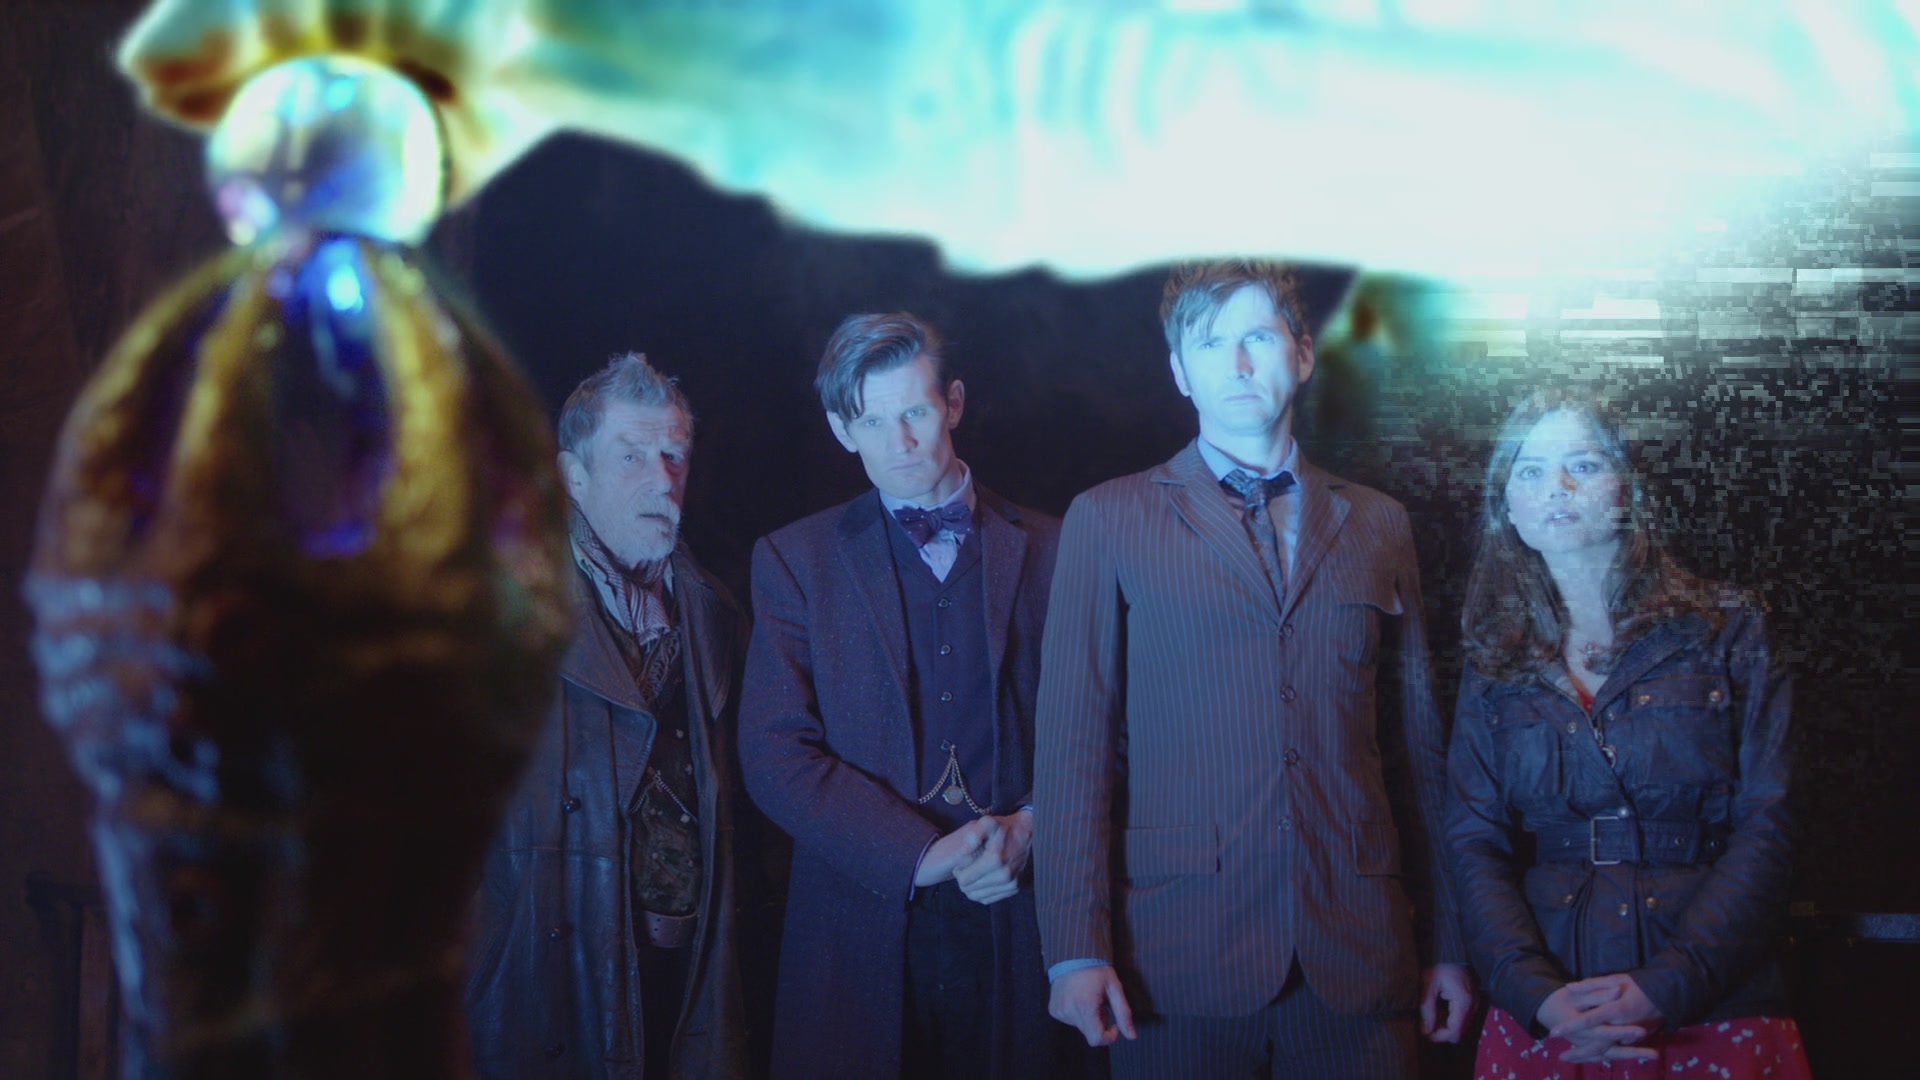 DayOfTheDoctor-Caps-0785.jpg